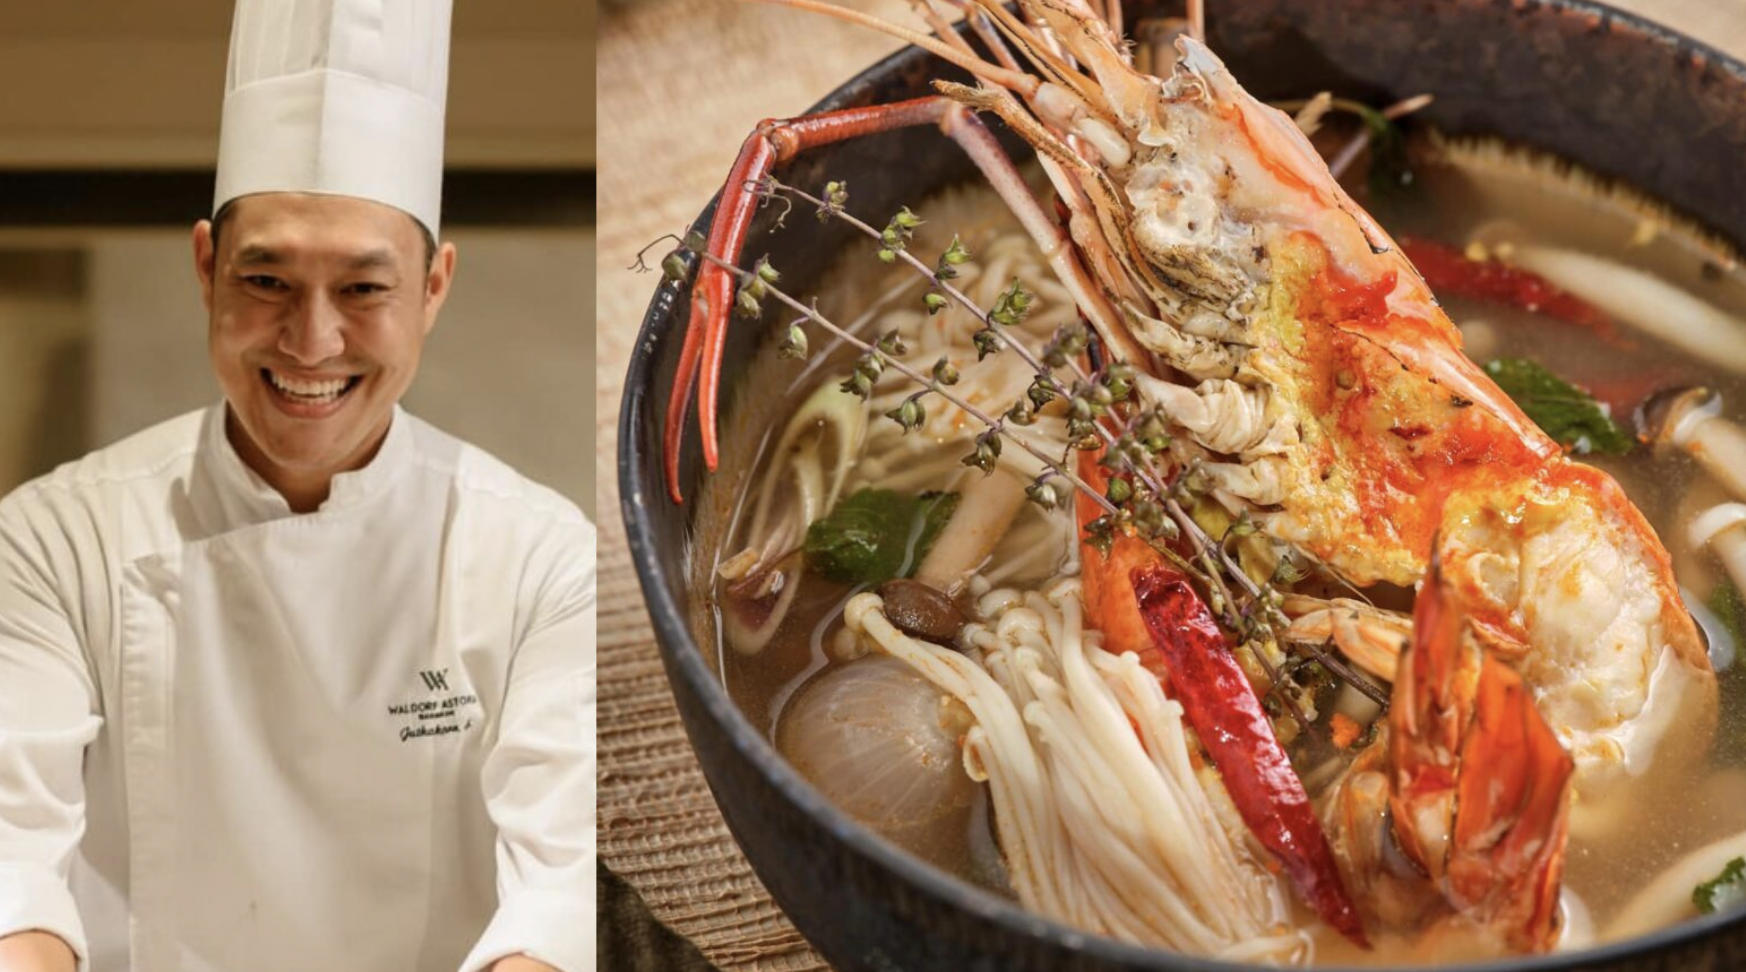 Bangkok’s Chef Mink is Conrad Manila’s first ‘Legendary Chef’ in three-part dining series